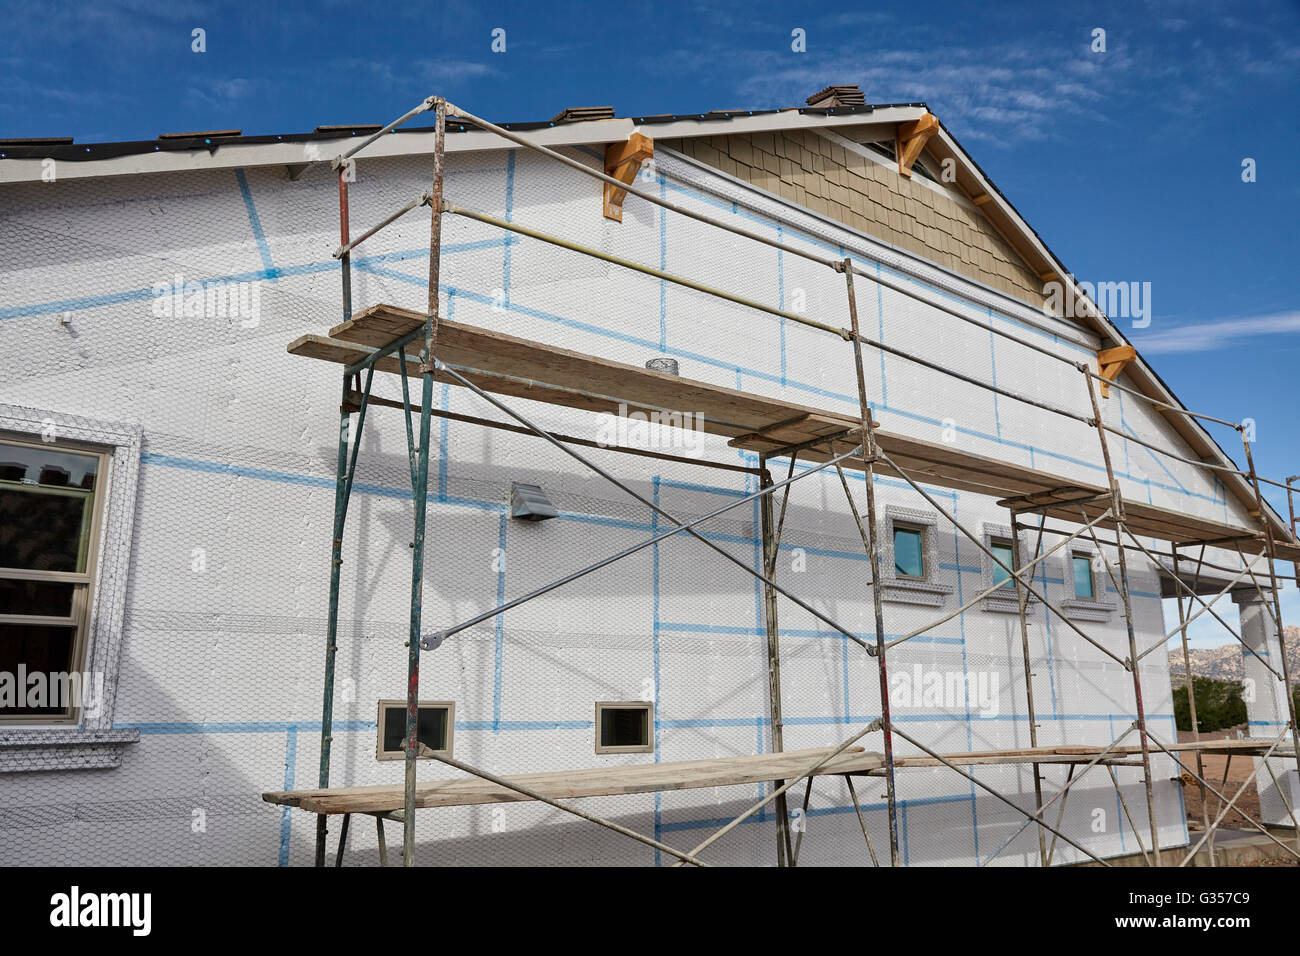 Home building industry house scaffolding for stucco and insulation foam Stock Photo